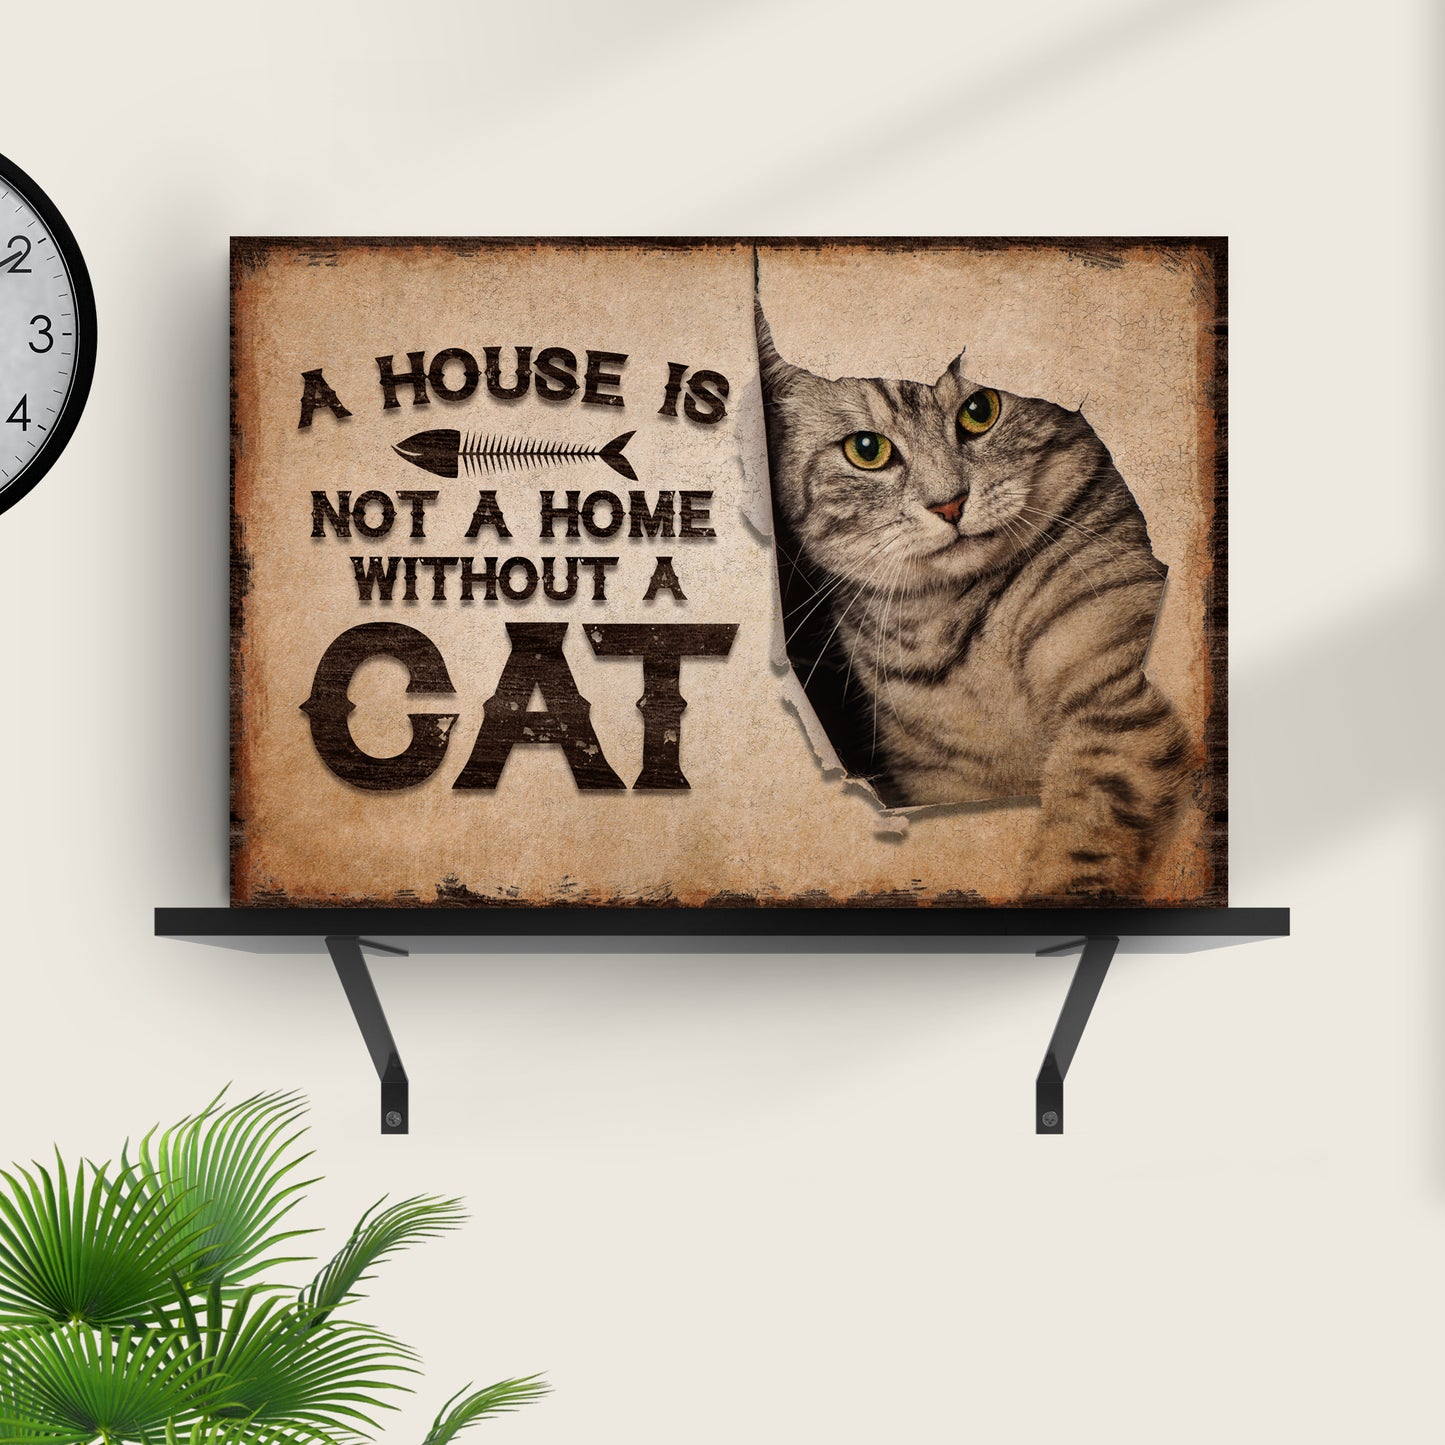 A House Is Not A Home Without A Cat Pet Sign - Image by Tailored Canvases